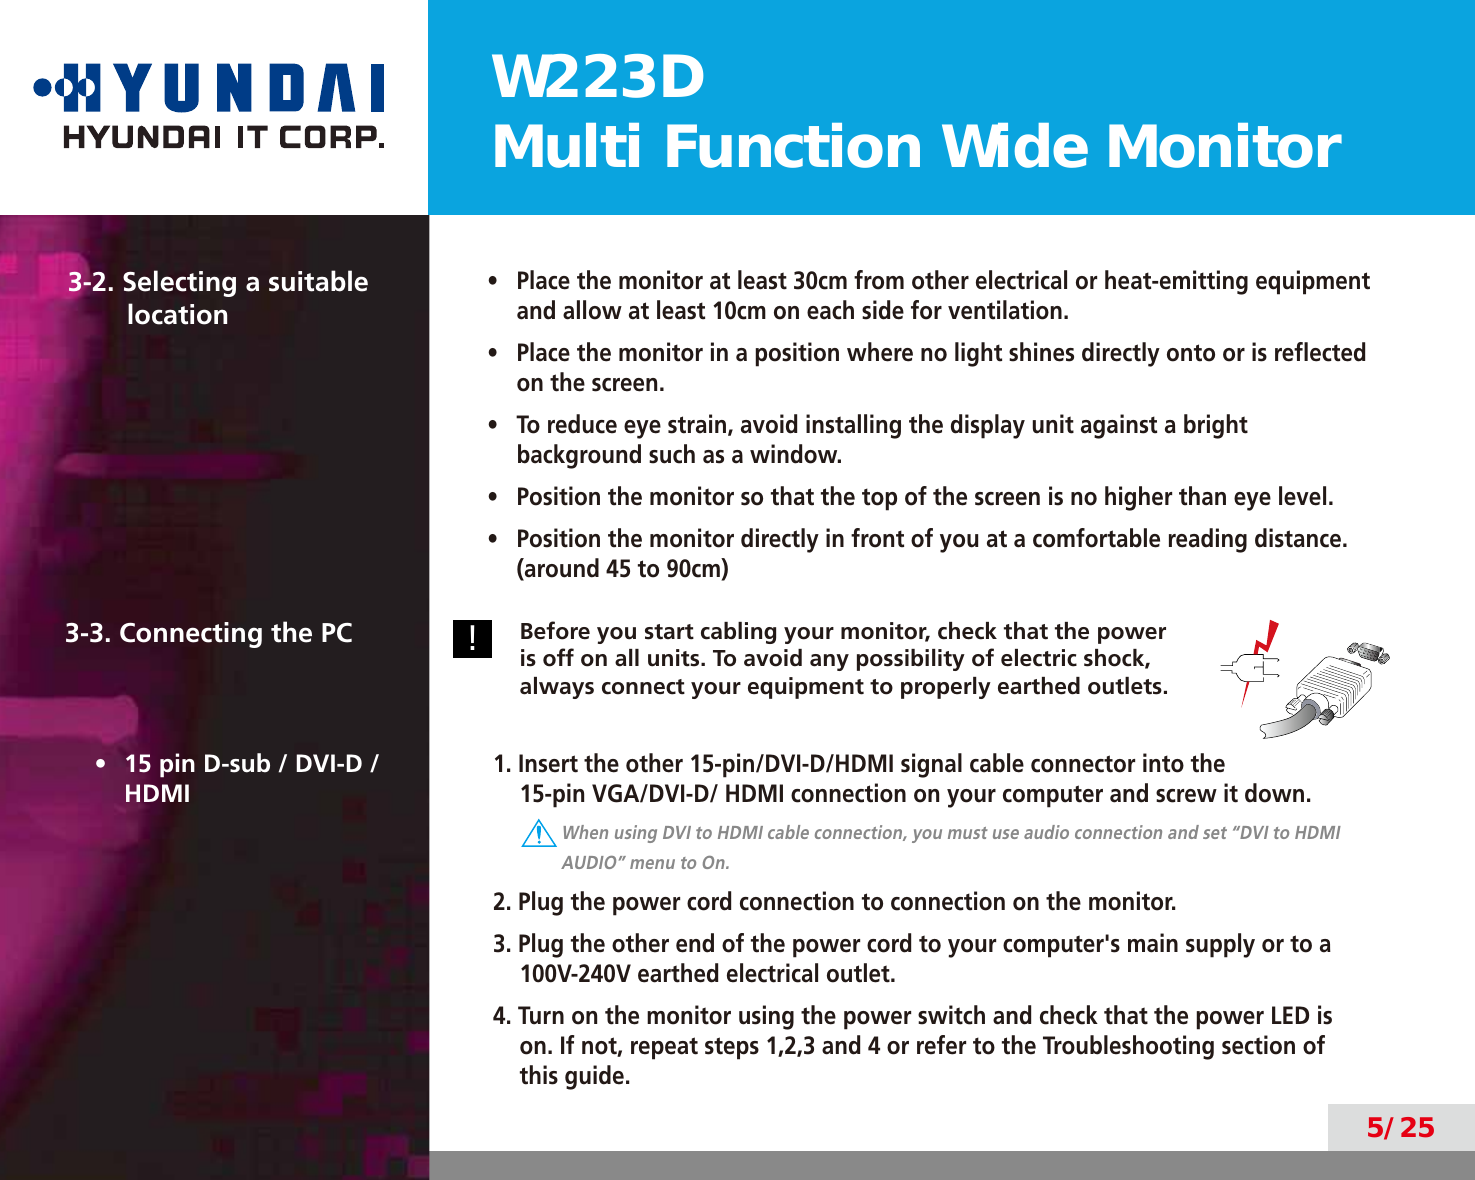 W223DMulti Function Wide Monitor5/253-2. Selecting a suitable  location•  Place the monitor at least 30cm from other electrical or heat-emitting equipment and allow at least 10cm on each side for ventilation.•  Place the monitor in a position where no light shines directly onto or is reﬂected on the screen.•  To reduce eye strain, avoid installing the display unit against a bright background such as a window.•  Position the monitor so that the top of the screen is no higher than eye level.•  Position the monitor directly in front of you at a comfortable reading distance. (around 45 to 90cm)3-3. Connecting the PC!Before you start cabling your monitor, check that the power is off on all units. To avoid any possibility of electric shock, always connect your equipment to properly earthed outlets.•  15 pin D-sub / DVI-D / HDMI1. Insert the other 15-pin/DVI-D/HDMI signal cable connector into the  15-pin VGA/DVI-D/ HDMI connection on your computer and screw it down. When using DVI to HDMI cable connection, you must use audio connection and set “DVI to HDMI AUDIO” menu to On.2. Plug the power cord connection to connection on the monitor.3. Plug the other end of the power cord to your computer&apos;s main supply or to a 100V-240V earthed electrical outlet.4. Turn on the monitor using the power switch and check that the power LED is on. If not, repeat steps 1,2,3 and 4 or refer to the Troubleshooting section of this guide.